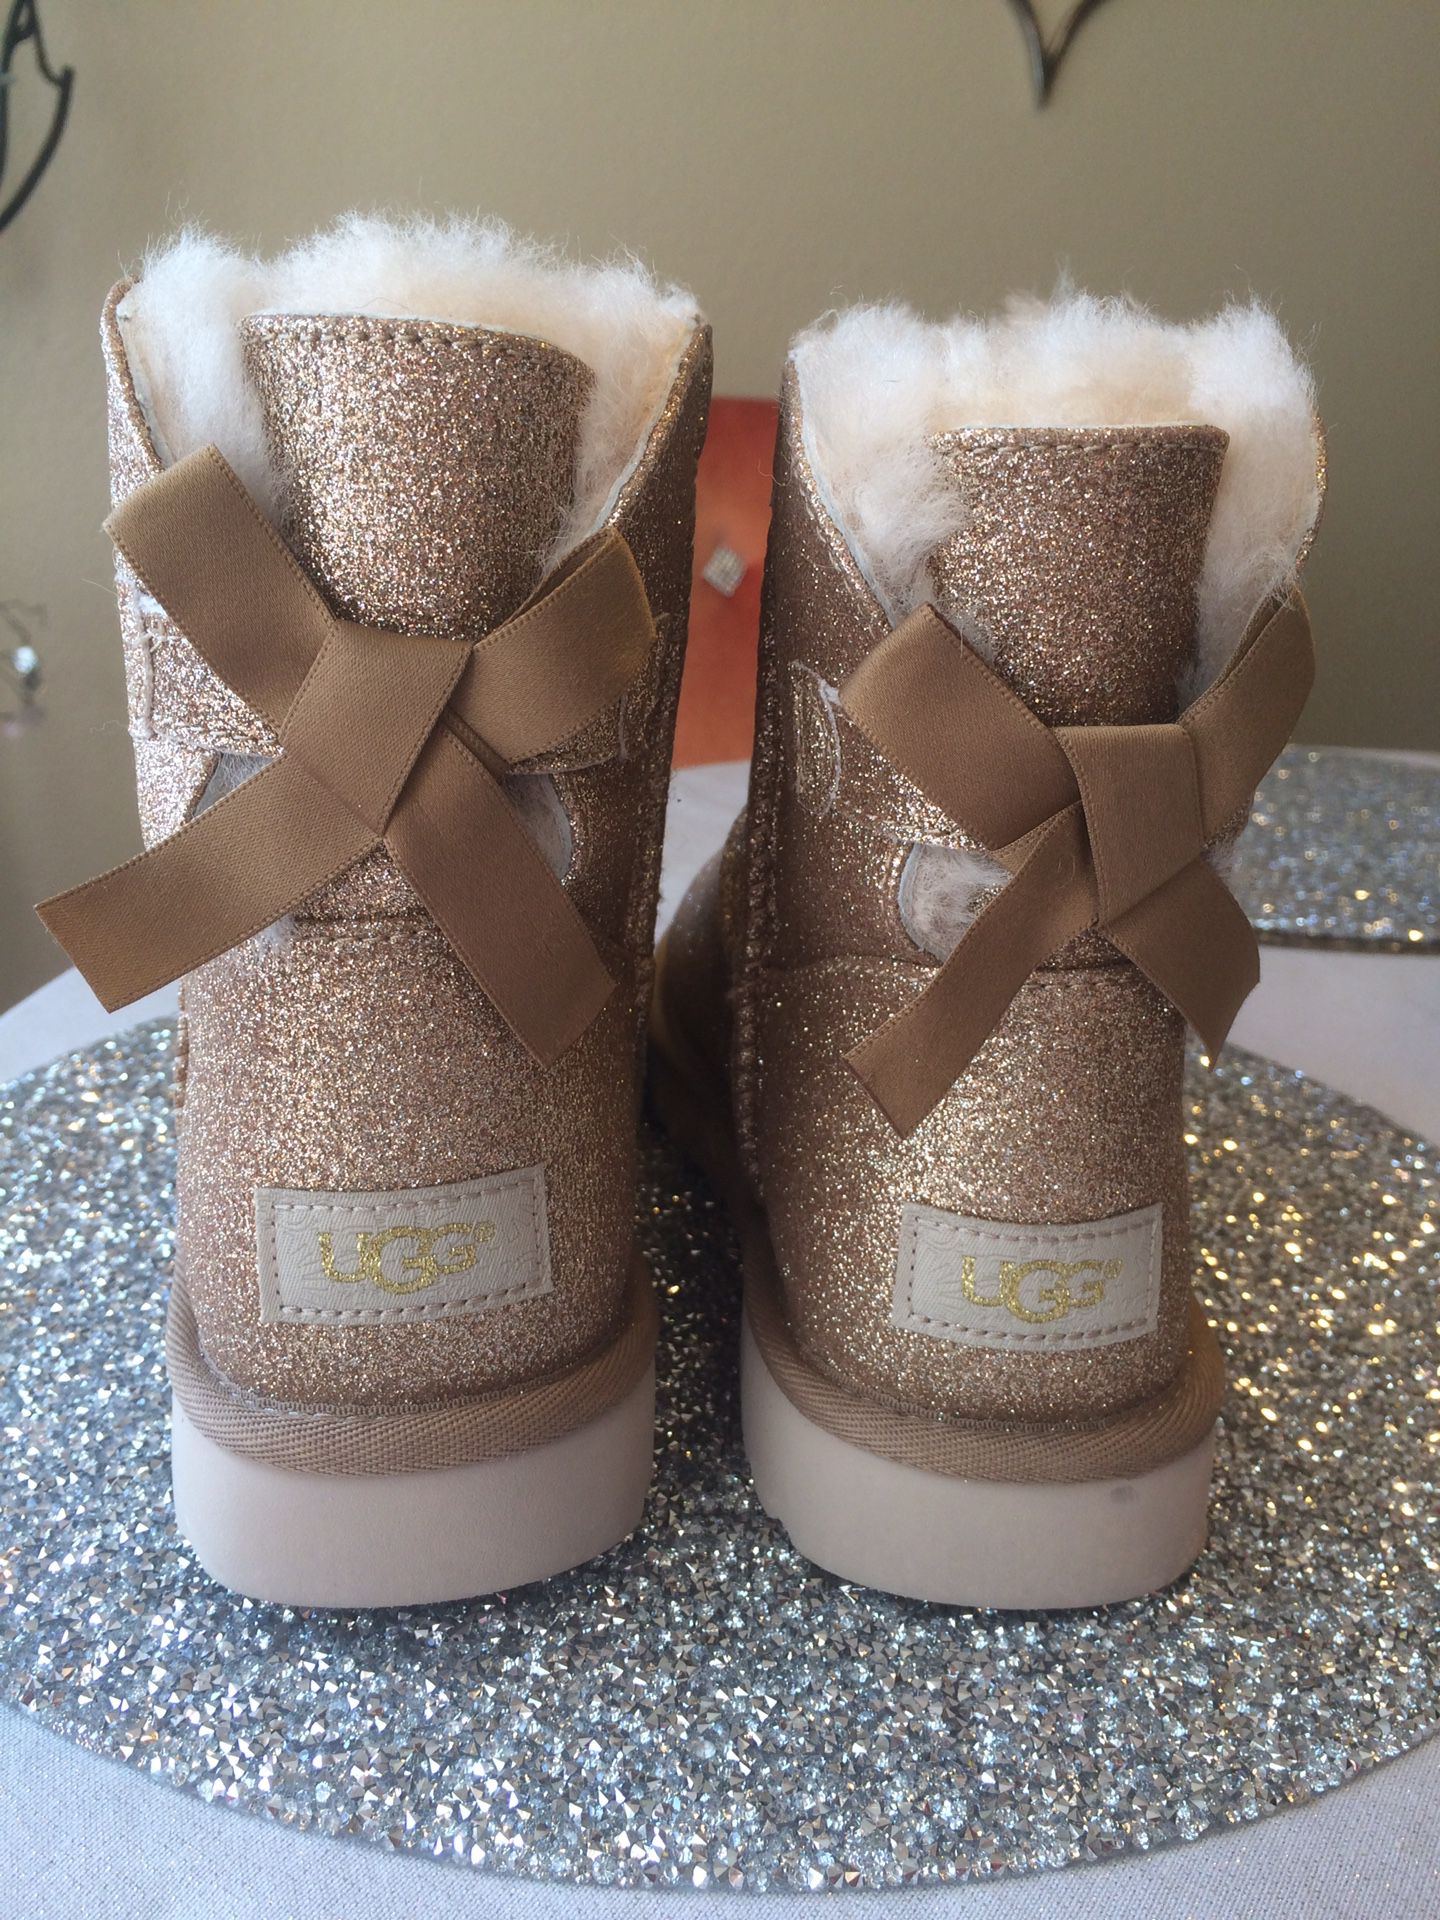 Brand new UGG mini bow sparkle glitter boots booties shearling fur lined size 8 NEW gold $100 100% authentic